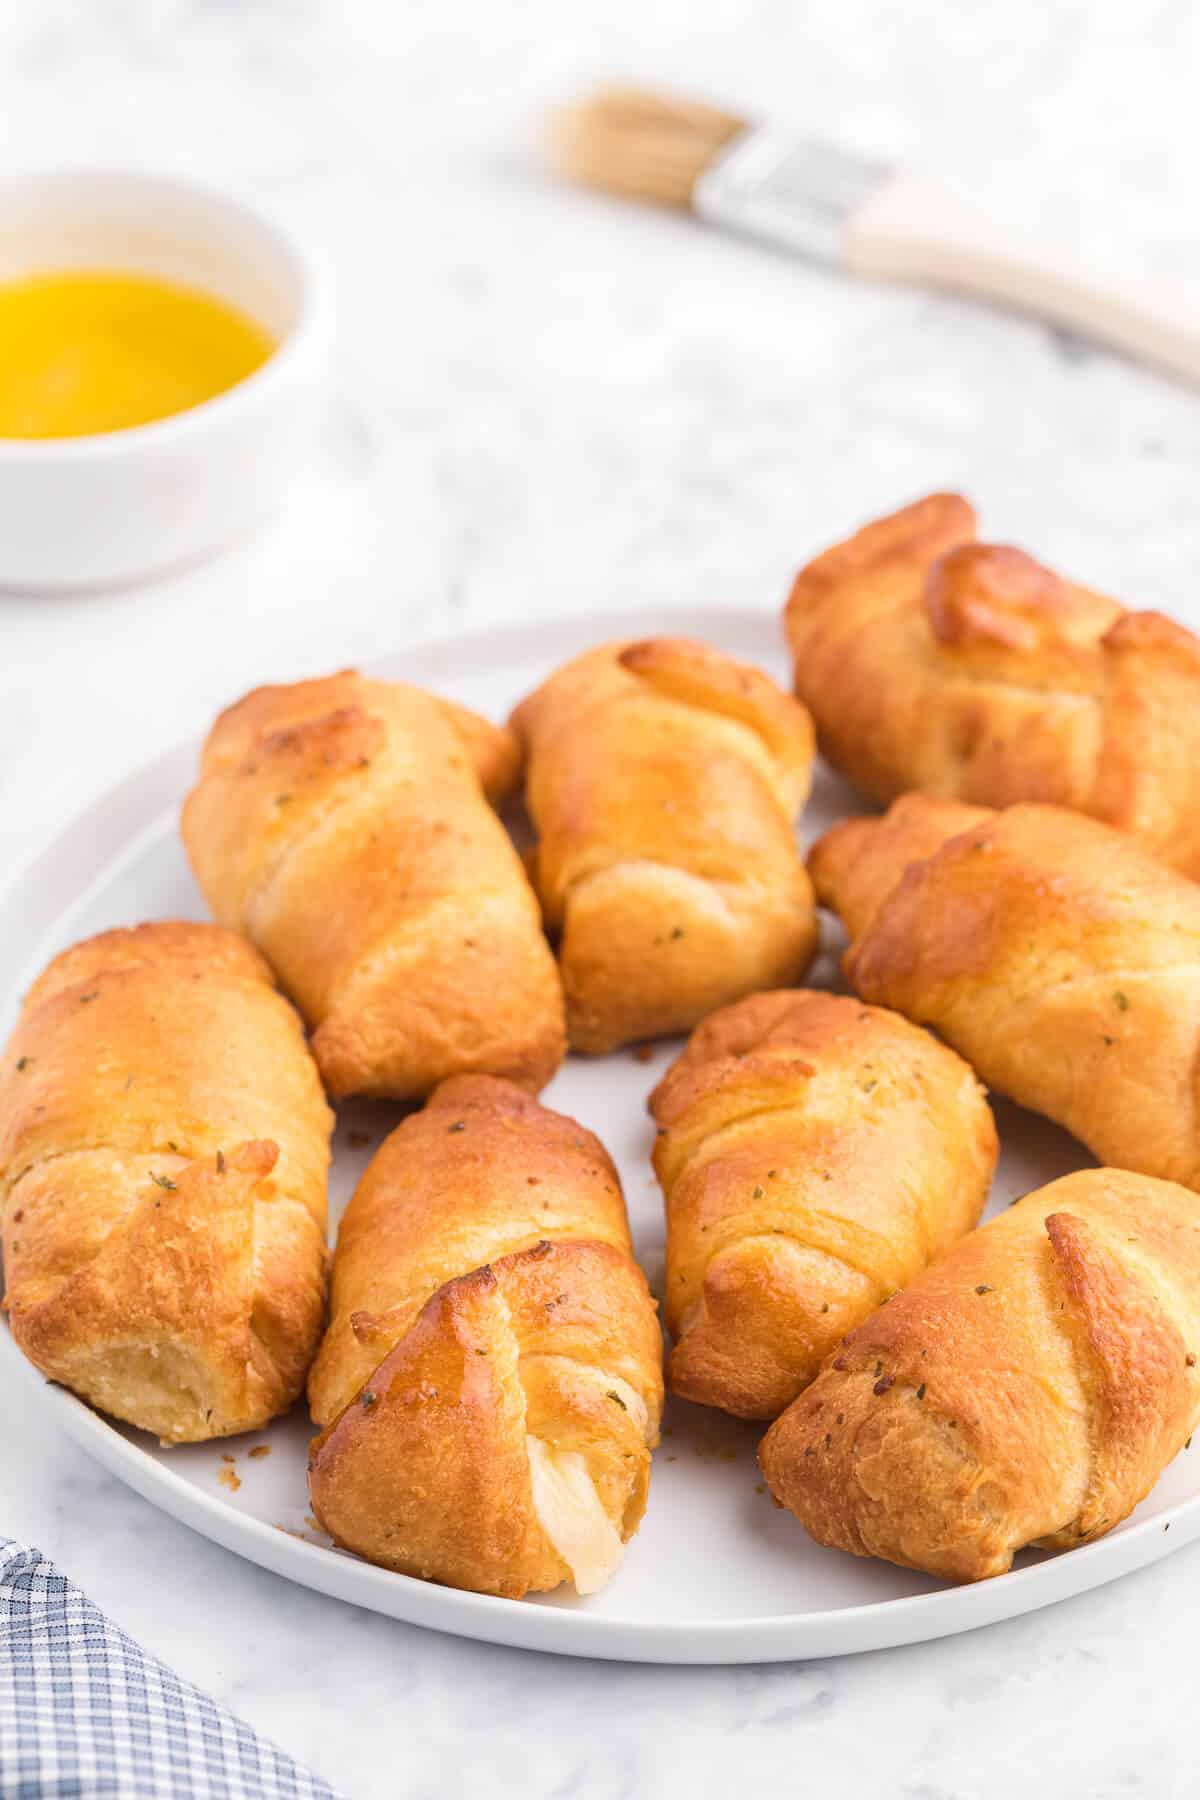 Air Fryer Garlic Cheese Stuffed Crescent Rolls Recipe - Use your air fryer to make this quick and easy snack or appetizer. Pillsbury crescent roll dough is brushed with garlic butter and wrapped around mozzarella cheese. Warning: they are addictive!